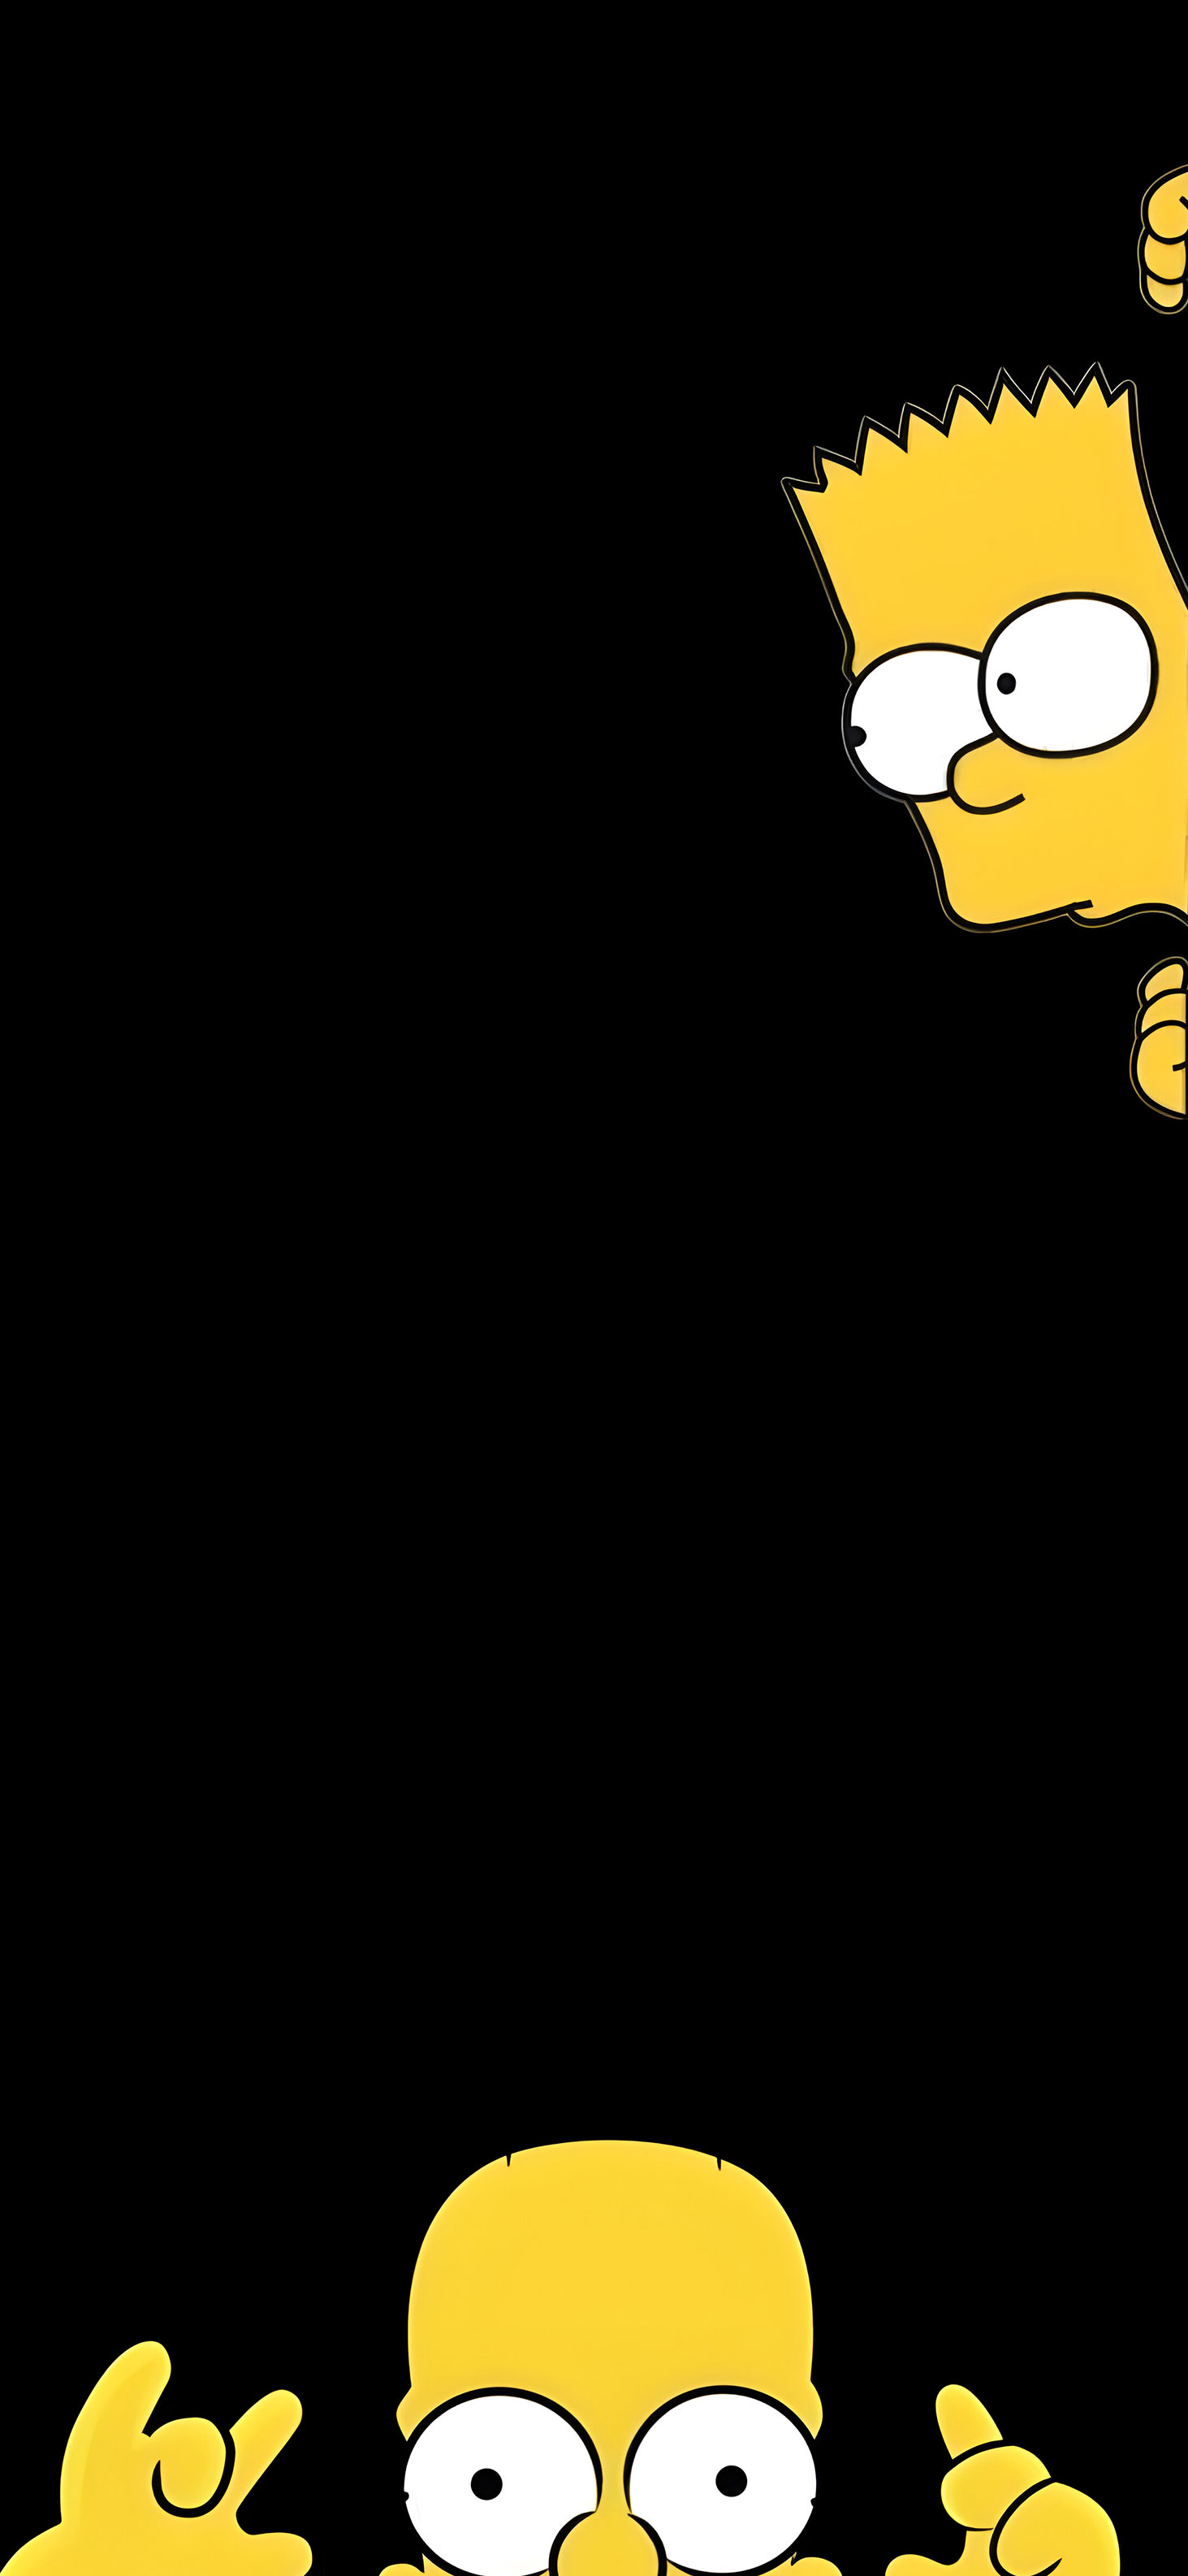 The Simpsons Homer & Bart Black Background Wallpapers - Wallpapers Clan